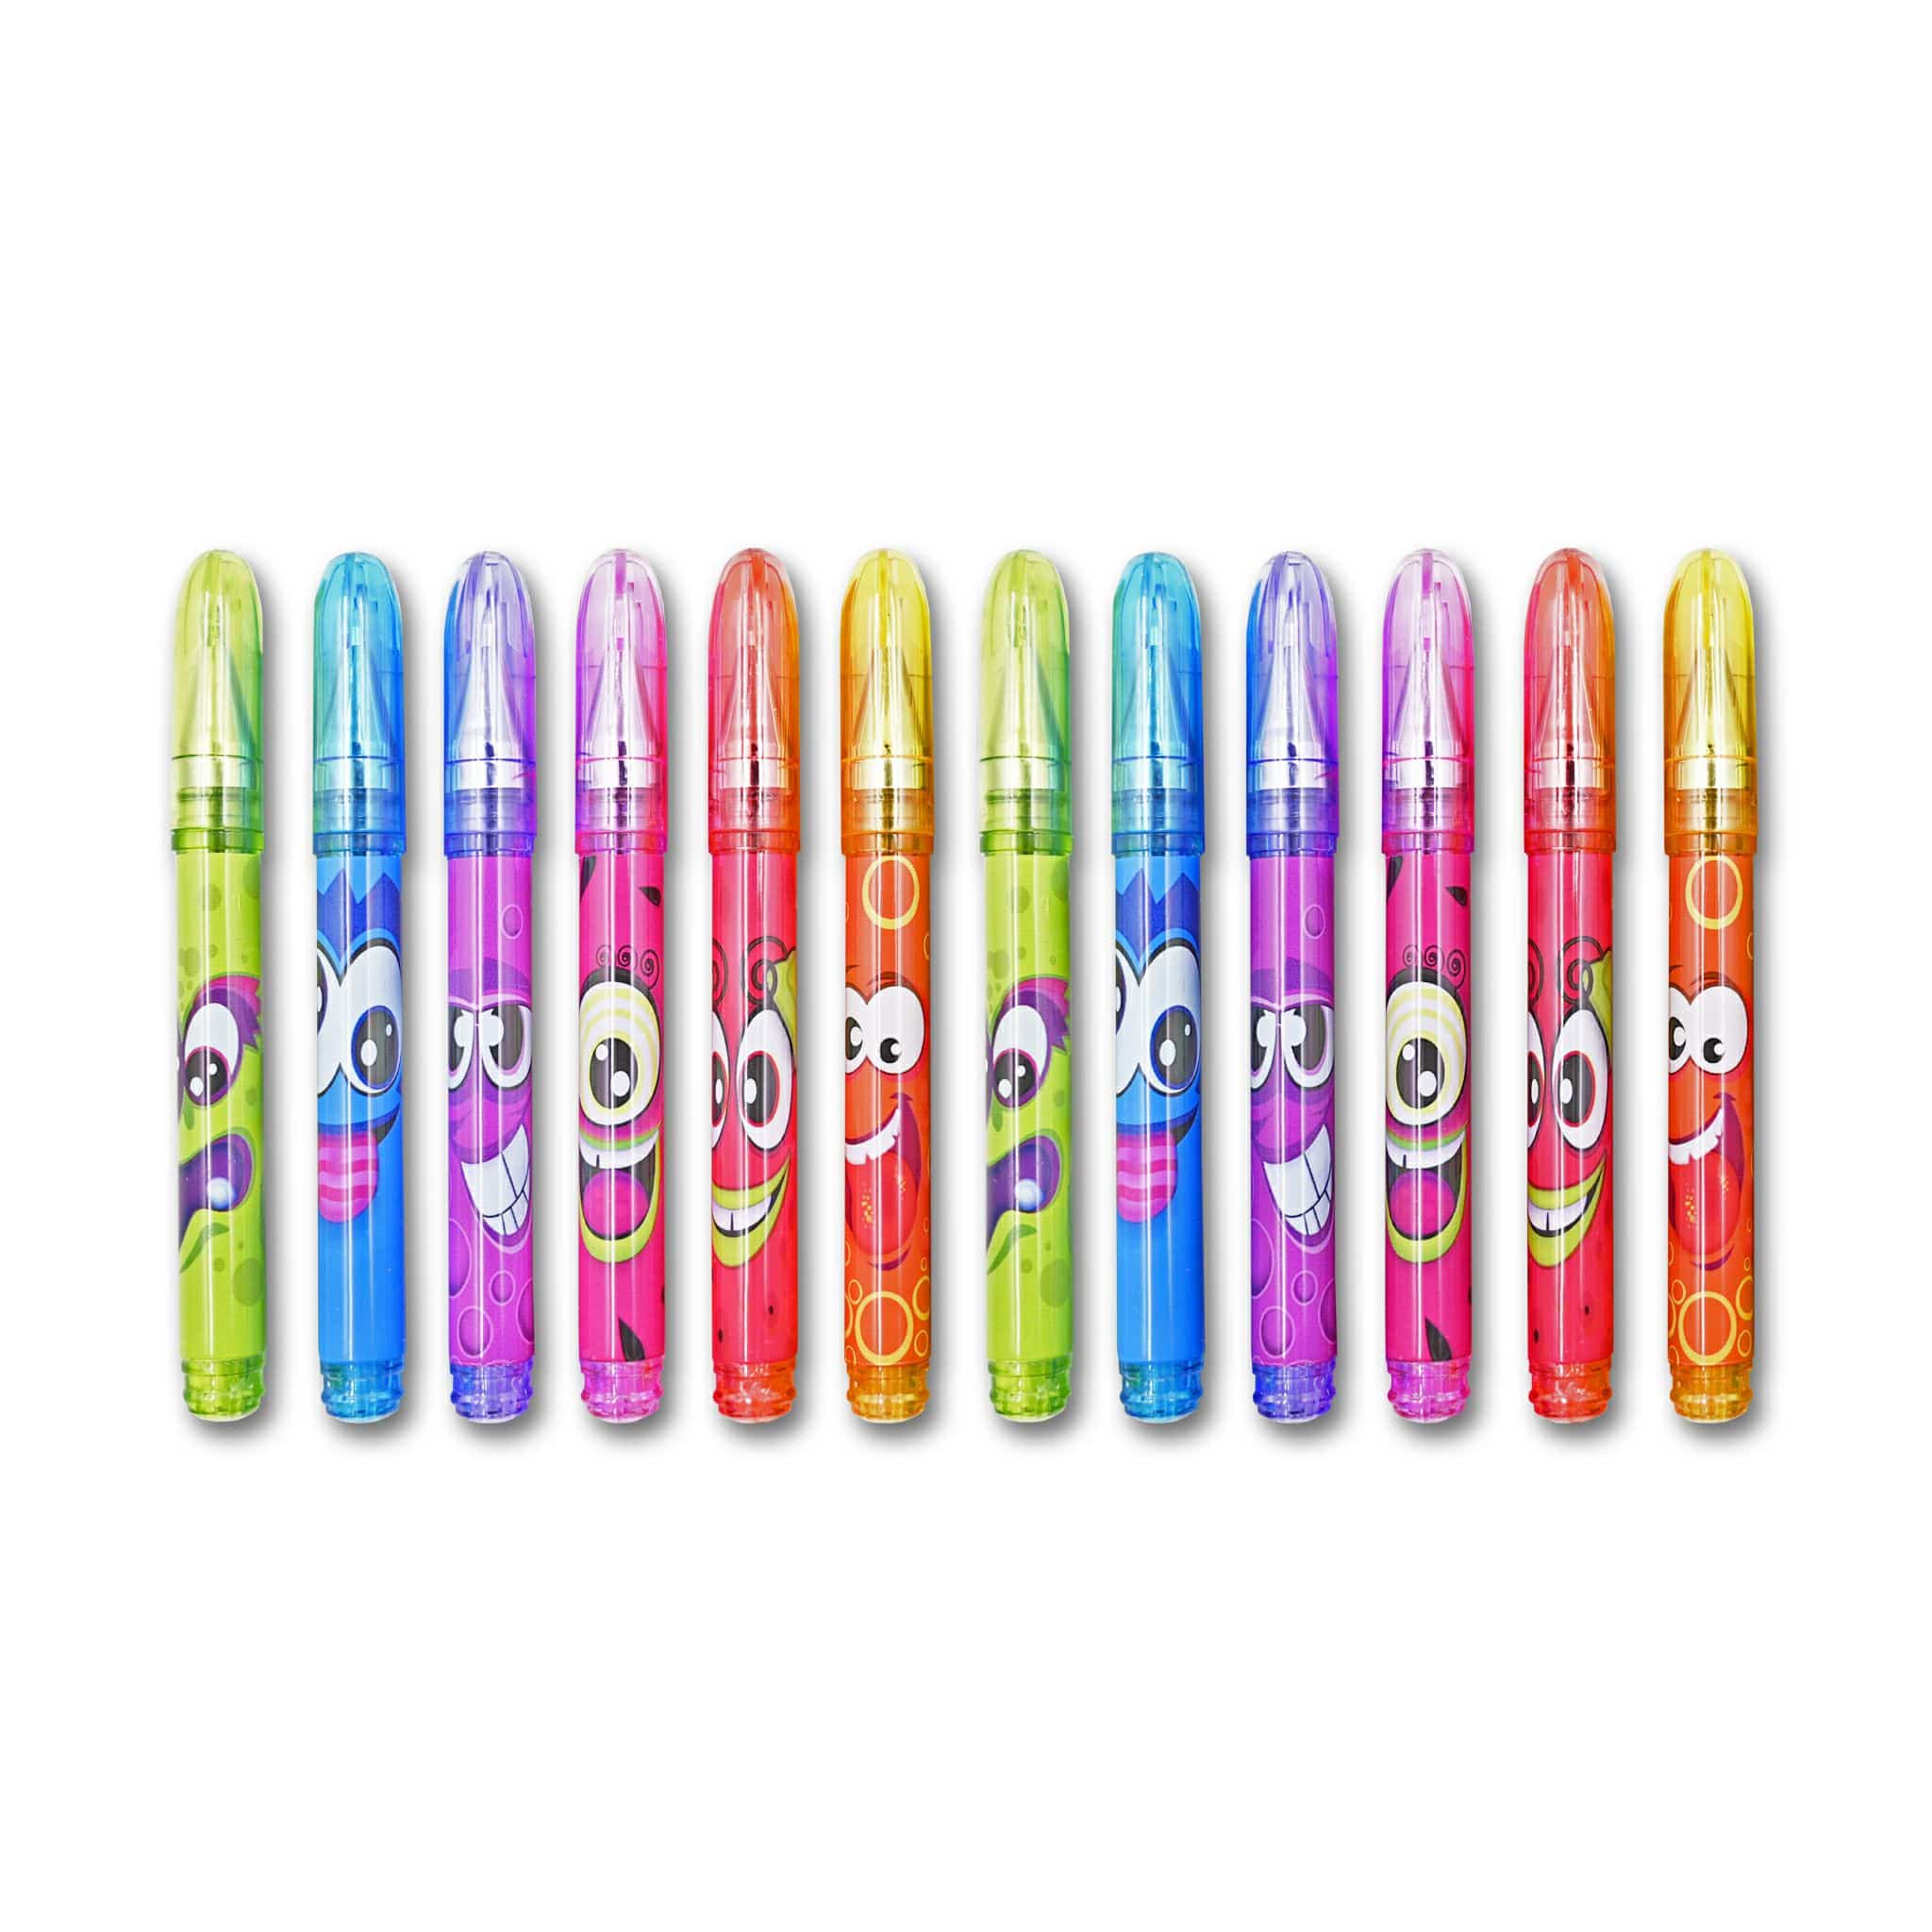 Scentco Scented Pens – The Great Rocky Mountain Toy Company